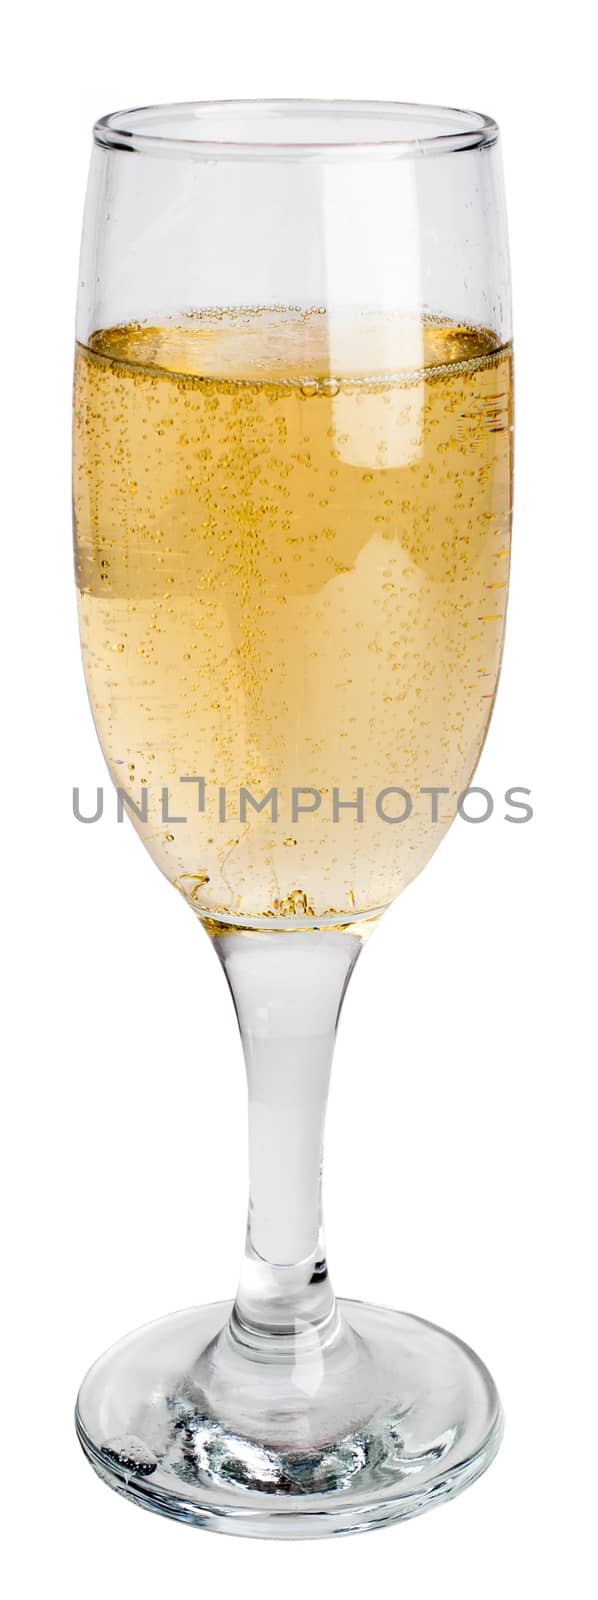 Glass of champagne, isolated on white background